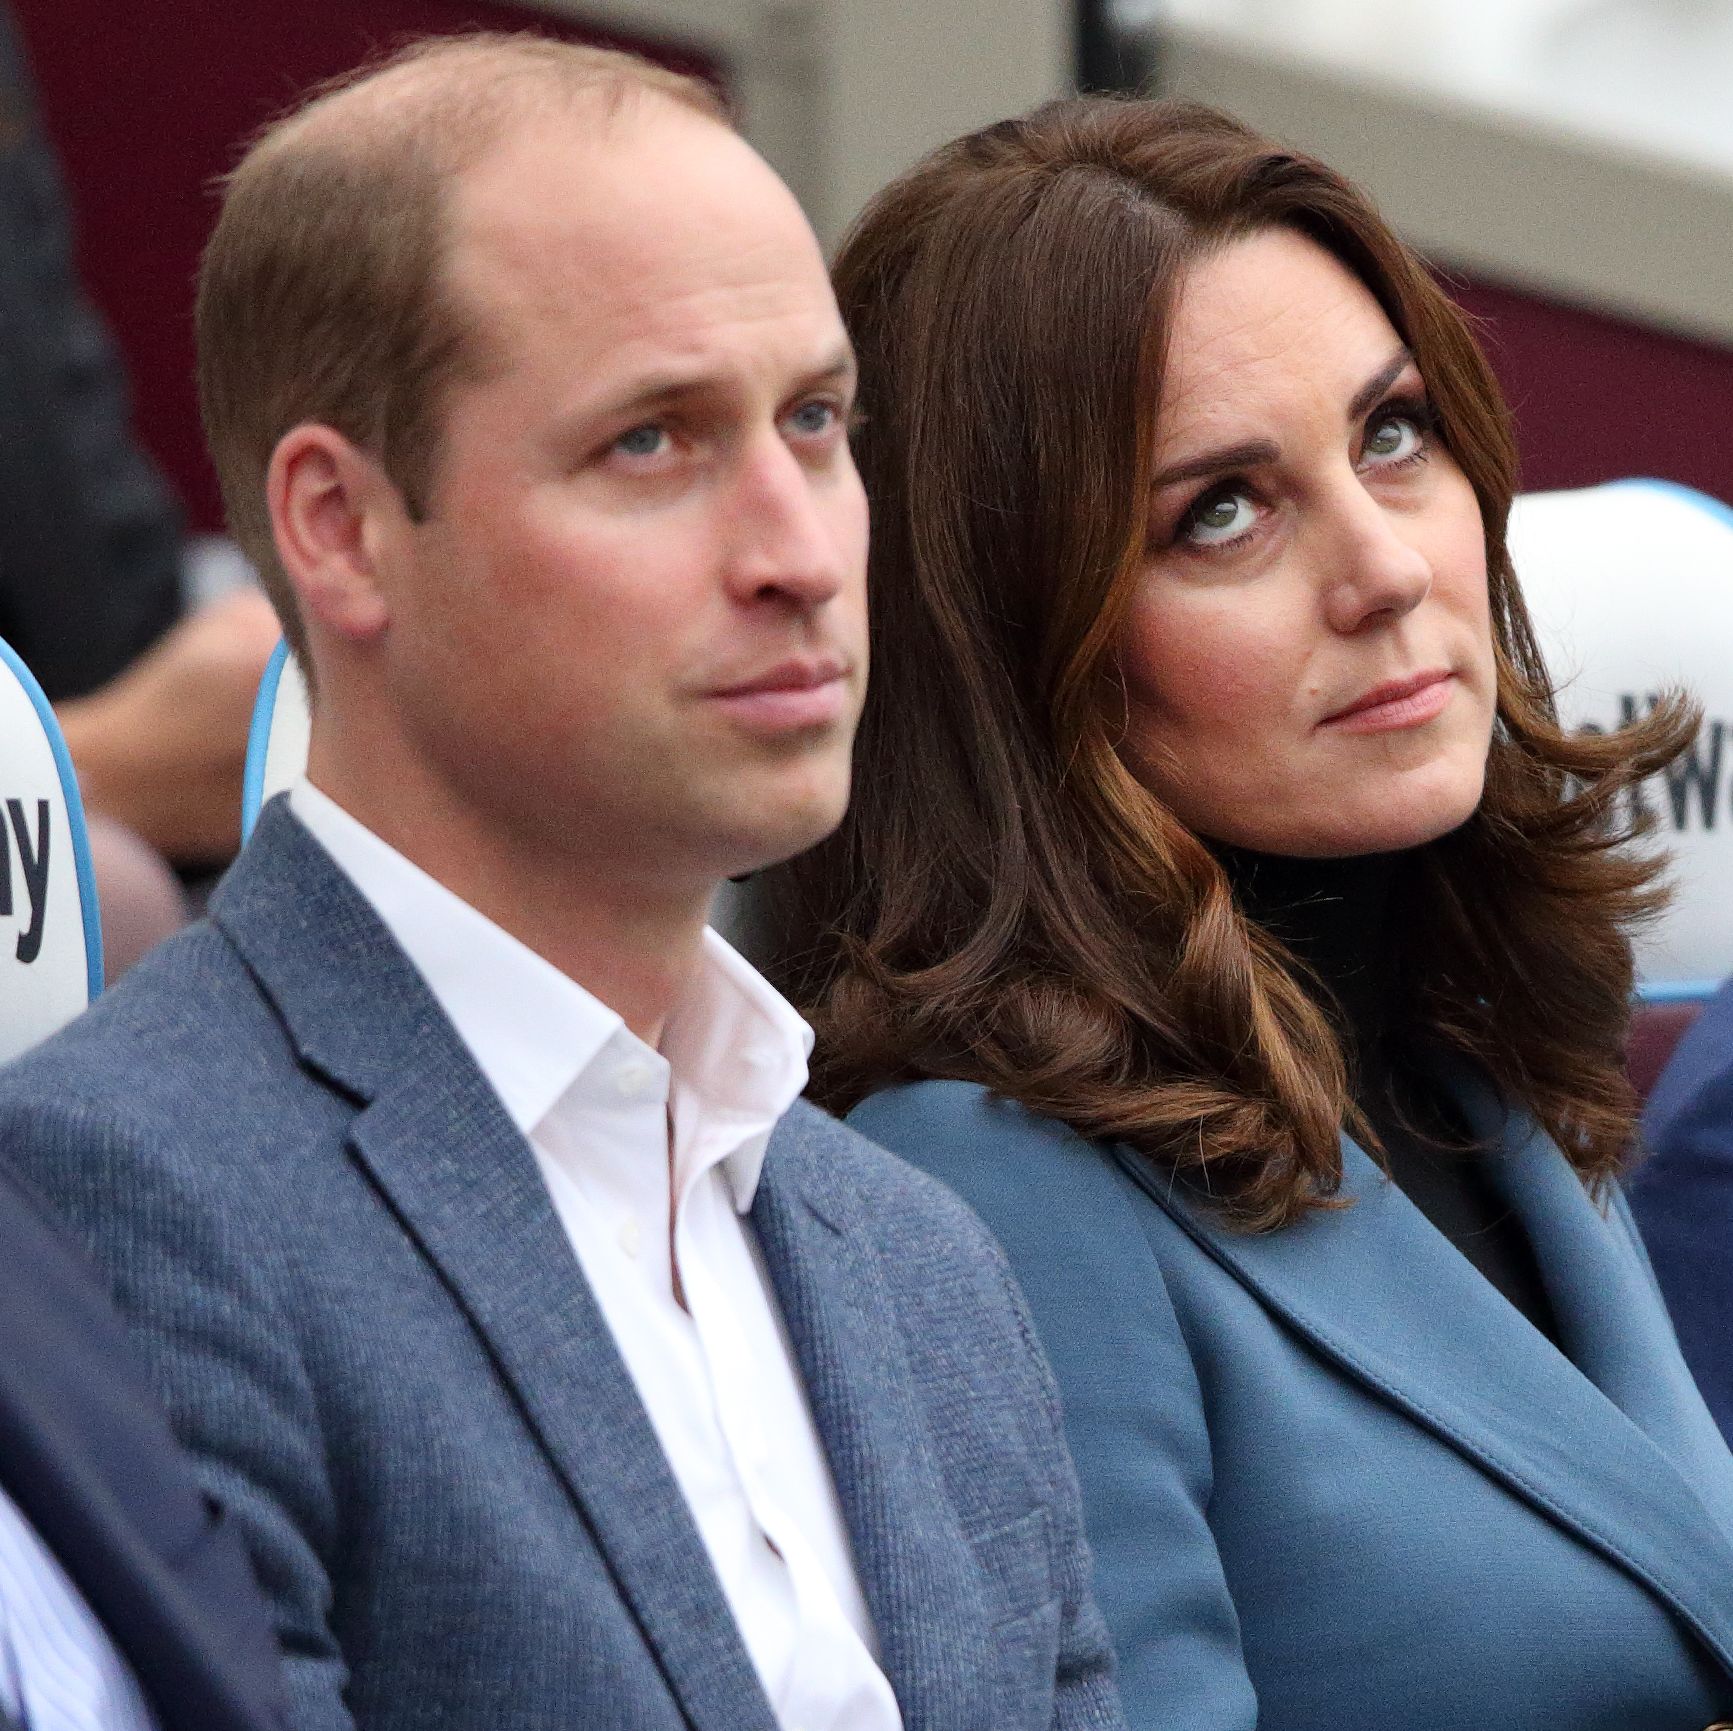 Prince Harry Reportedly Went Hardest on Prince William and Kate Middleton in His Memoir, 'Spare'